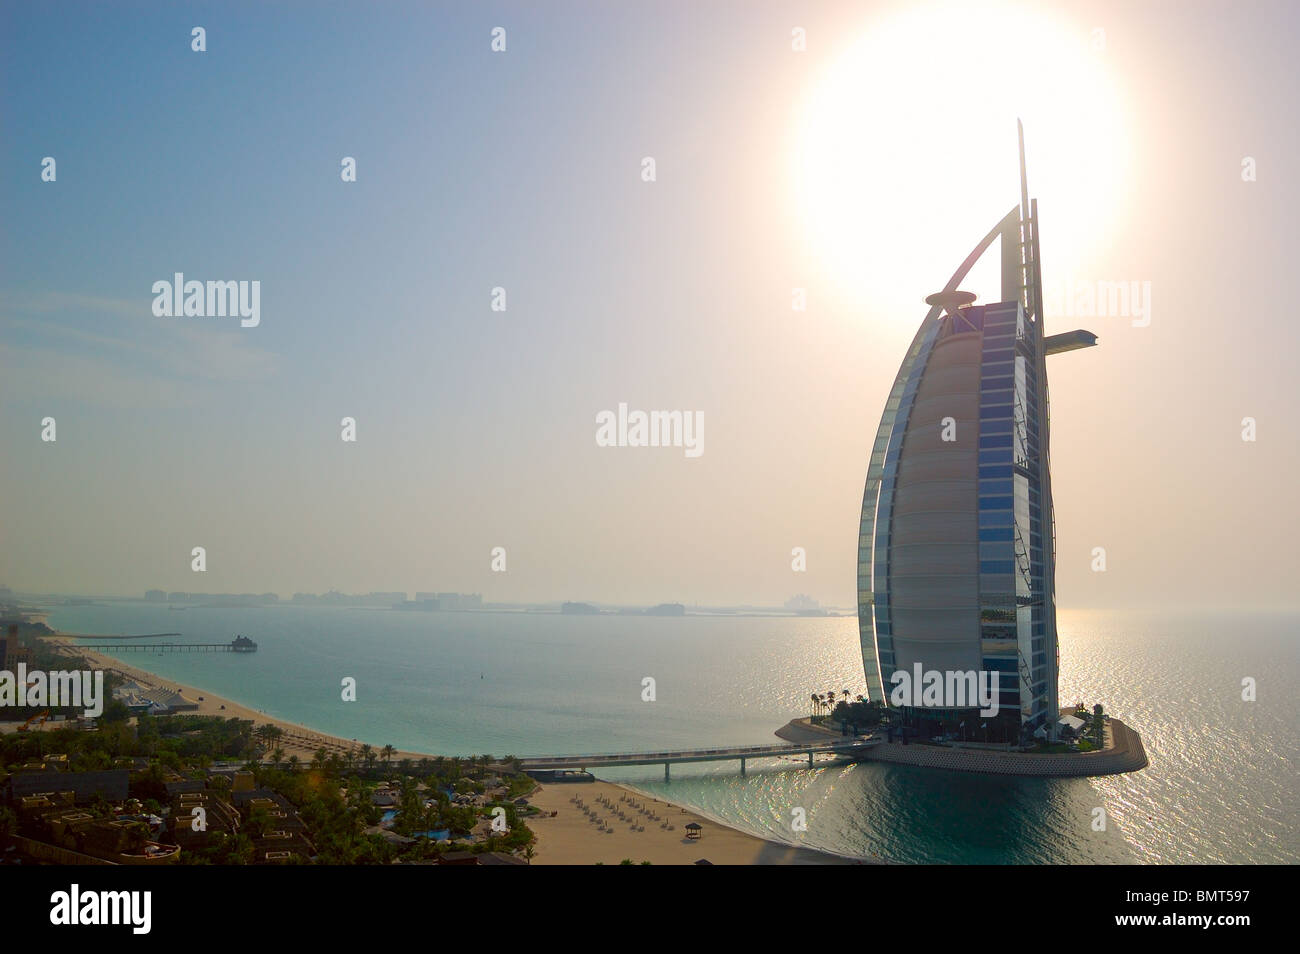 The world's first seven stars luxury hotel Burj Al Arab 'Tower of the Arabs', also known as 'Arab Sail' at sunset Stock Photo